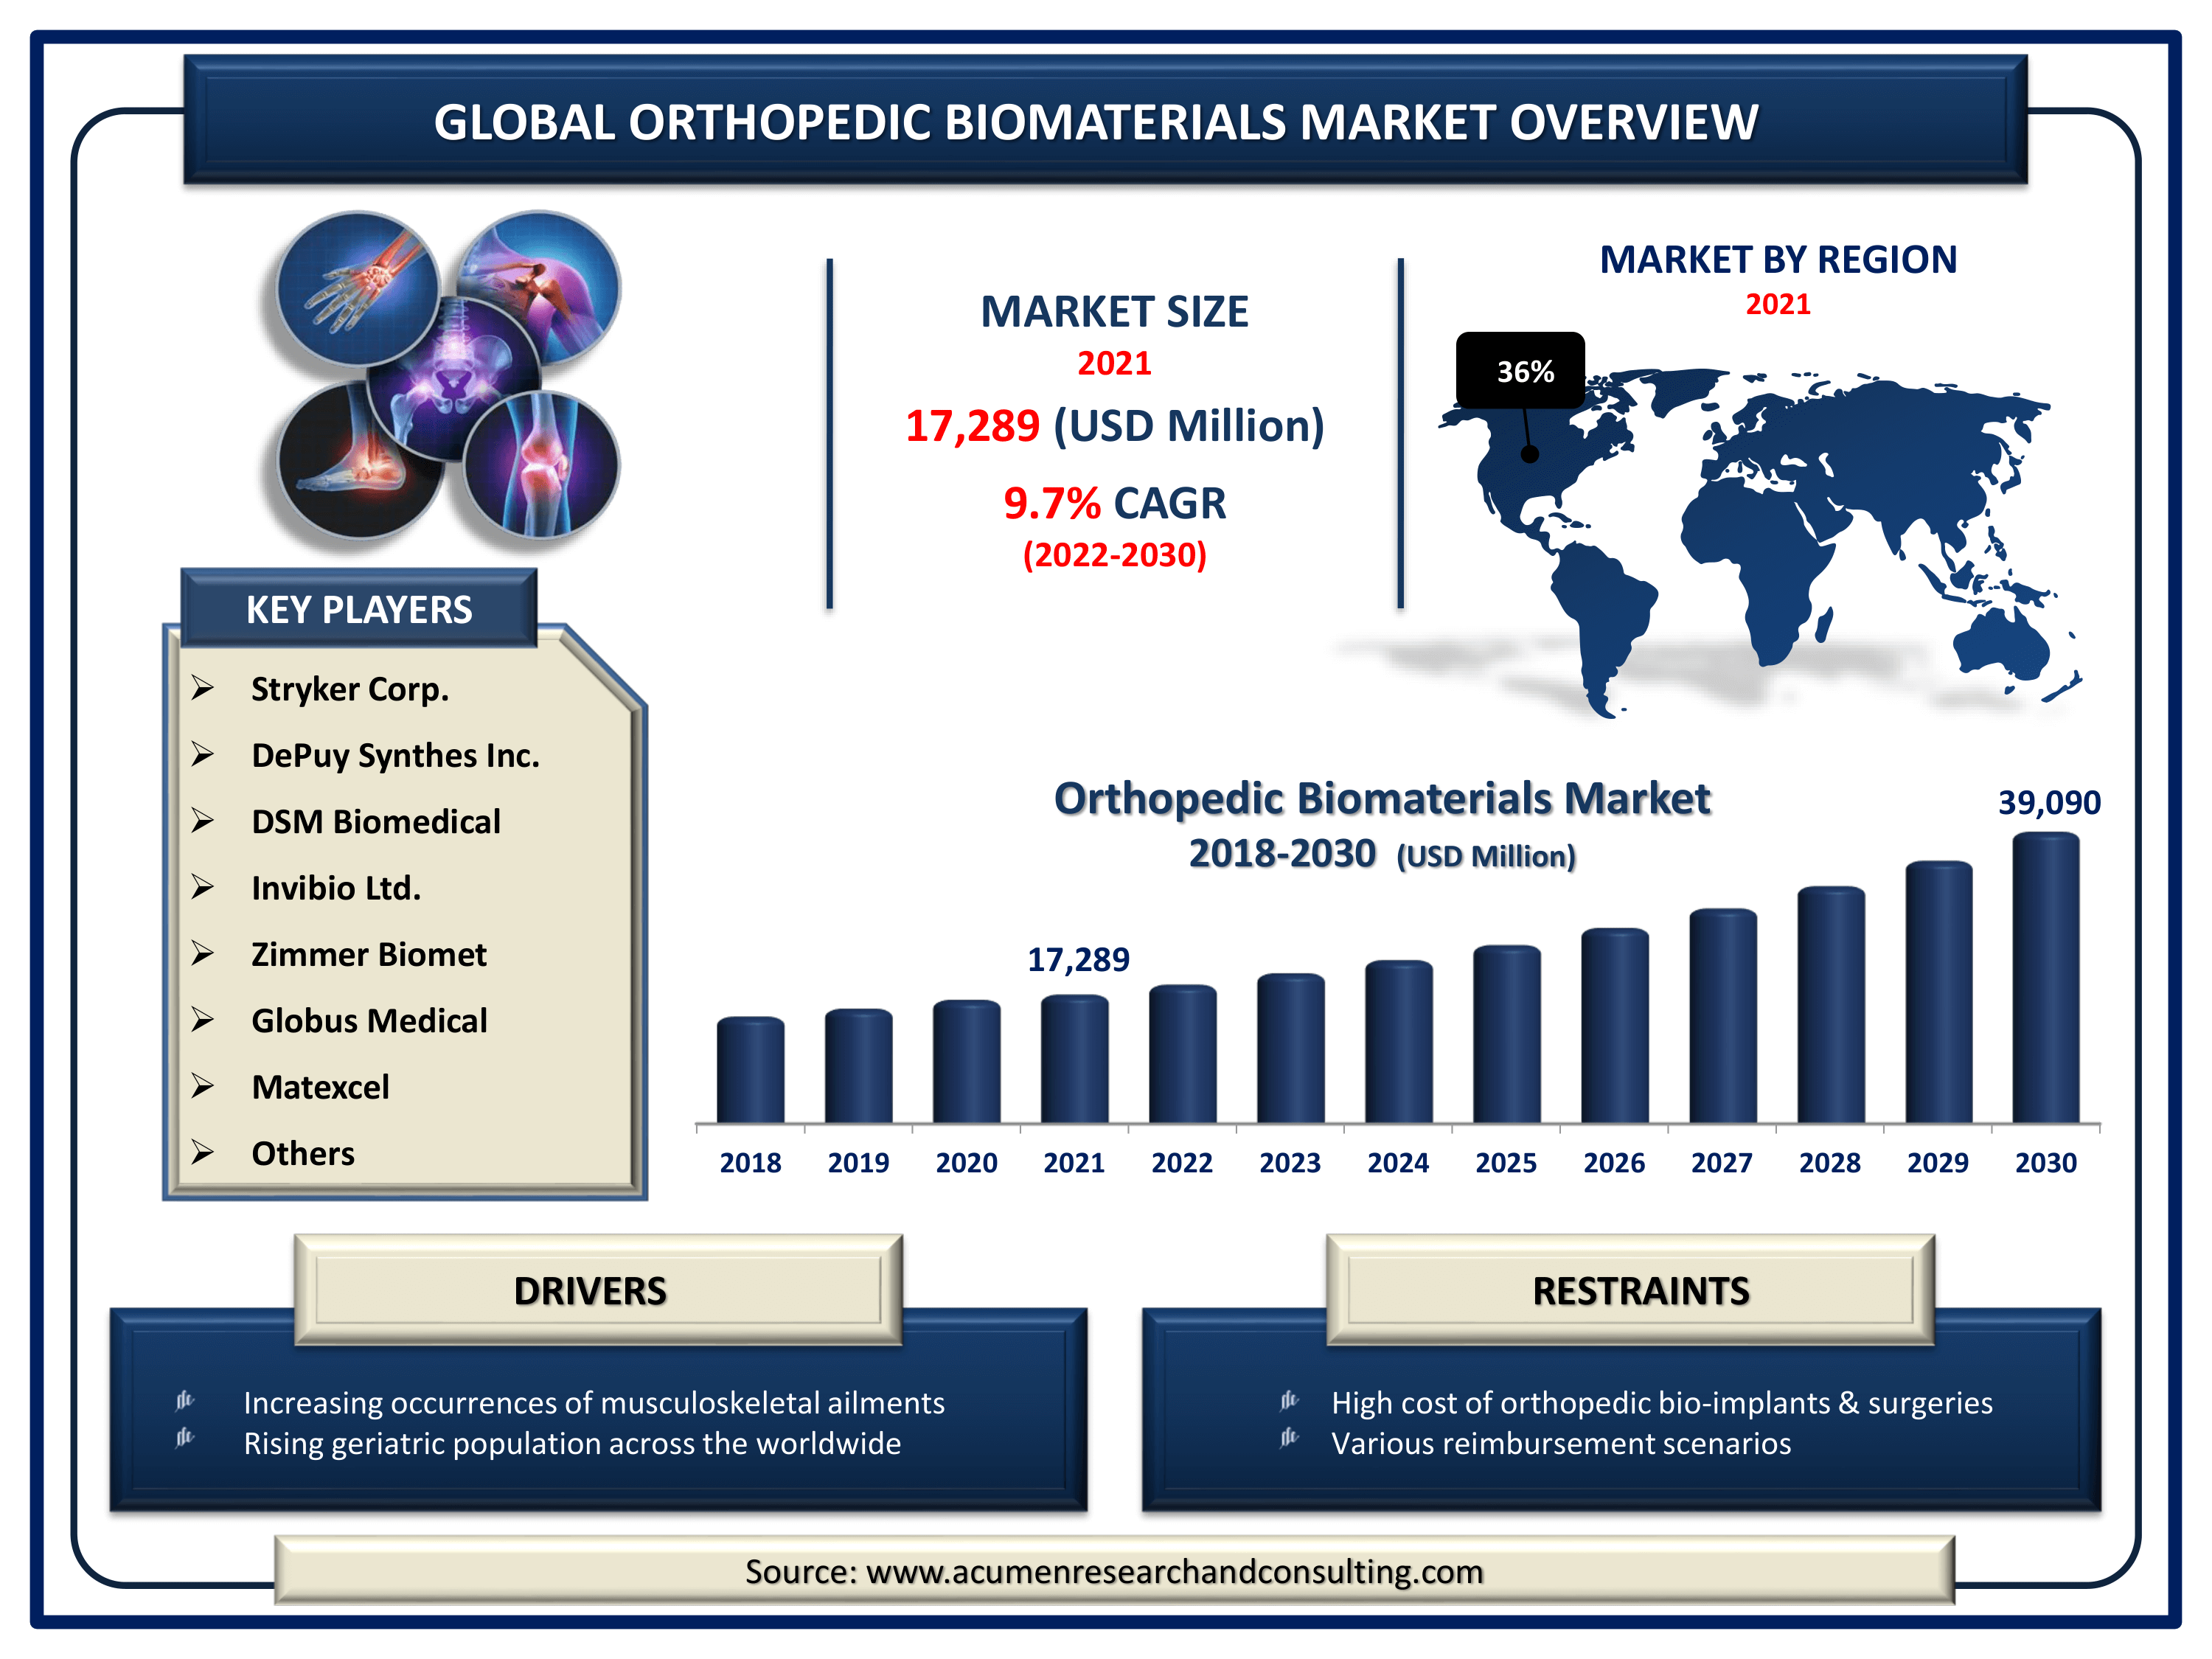 Global orthopedic biomaterials market value is estimated to expand by USD 39,090 million by 2030, with a 9.7% CAGR from 2022 to 2030